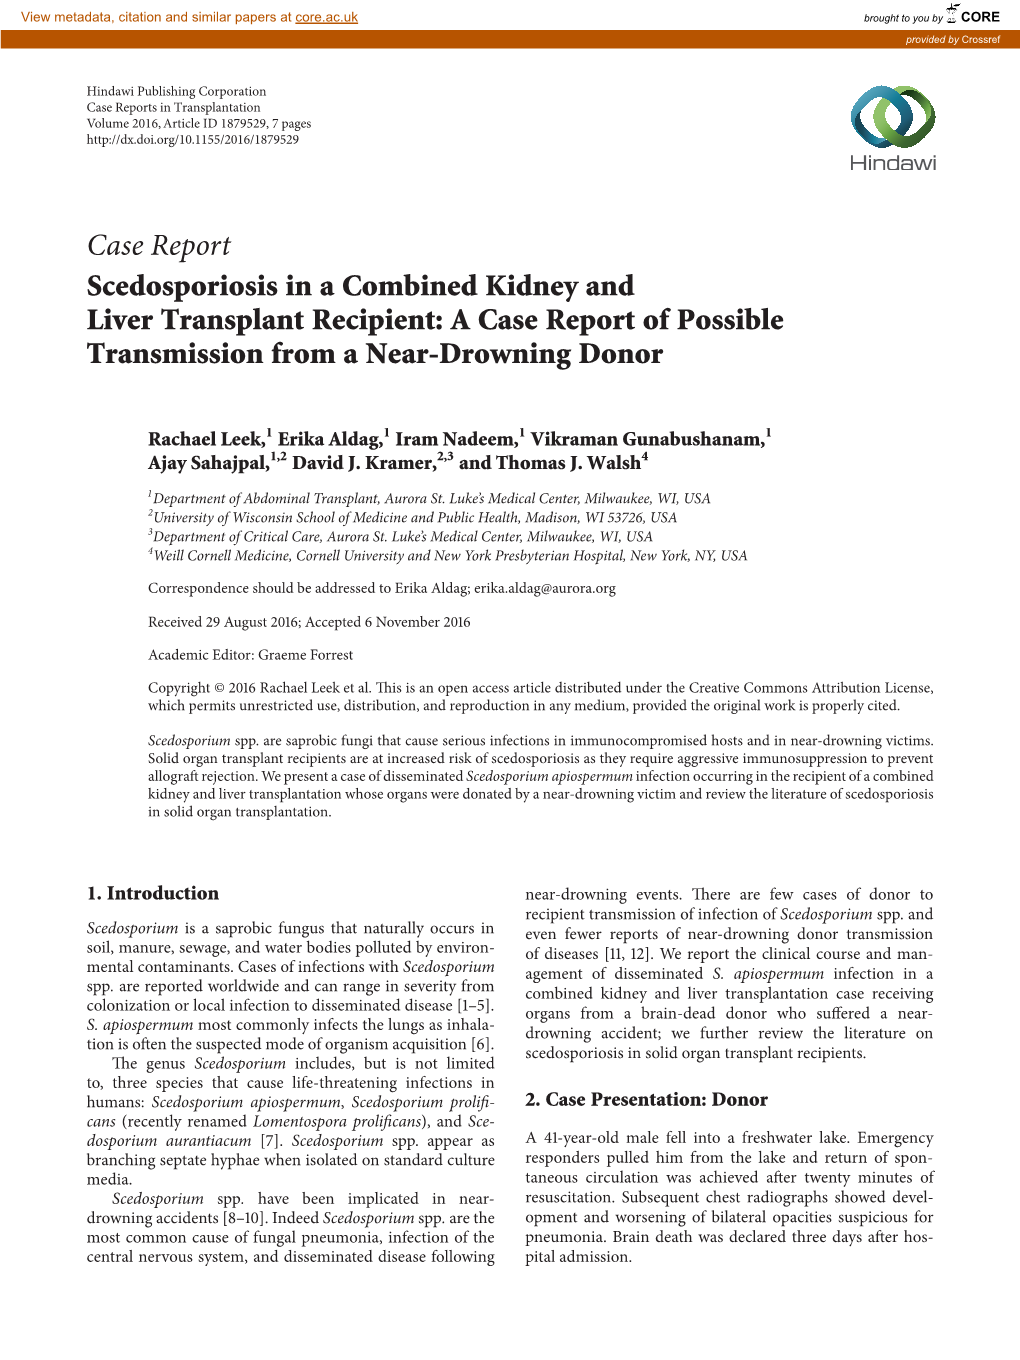 Case Report Scedosporiosis in a Combined Kidney and Liver Transplant Recipient: a Case Report of Possible Transmission from a Near-Drowning Donor